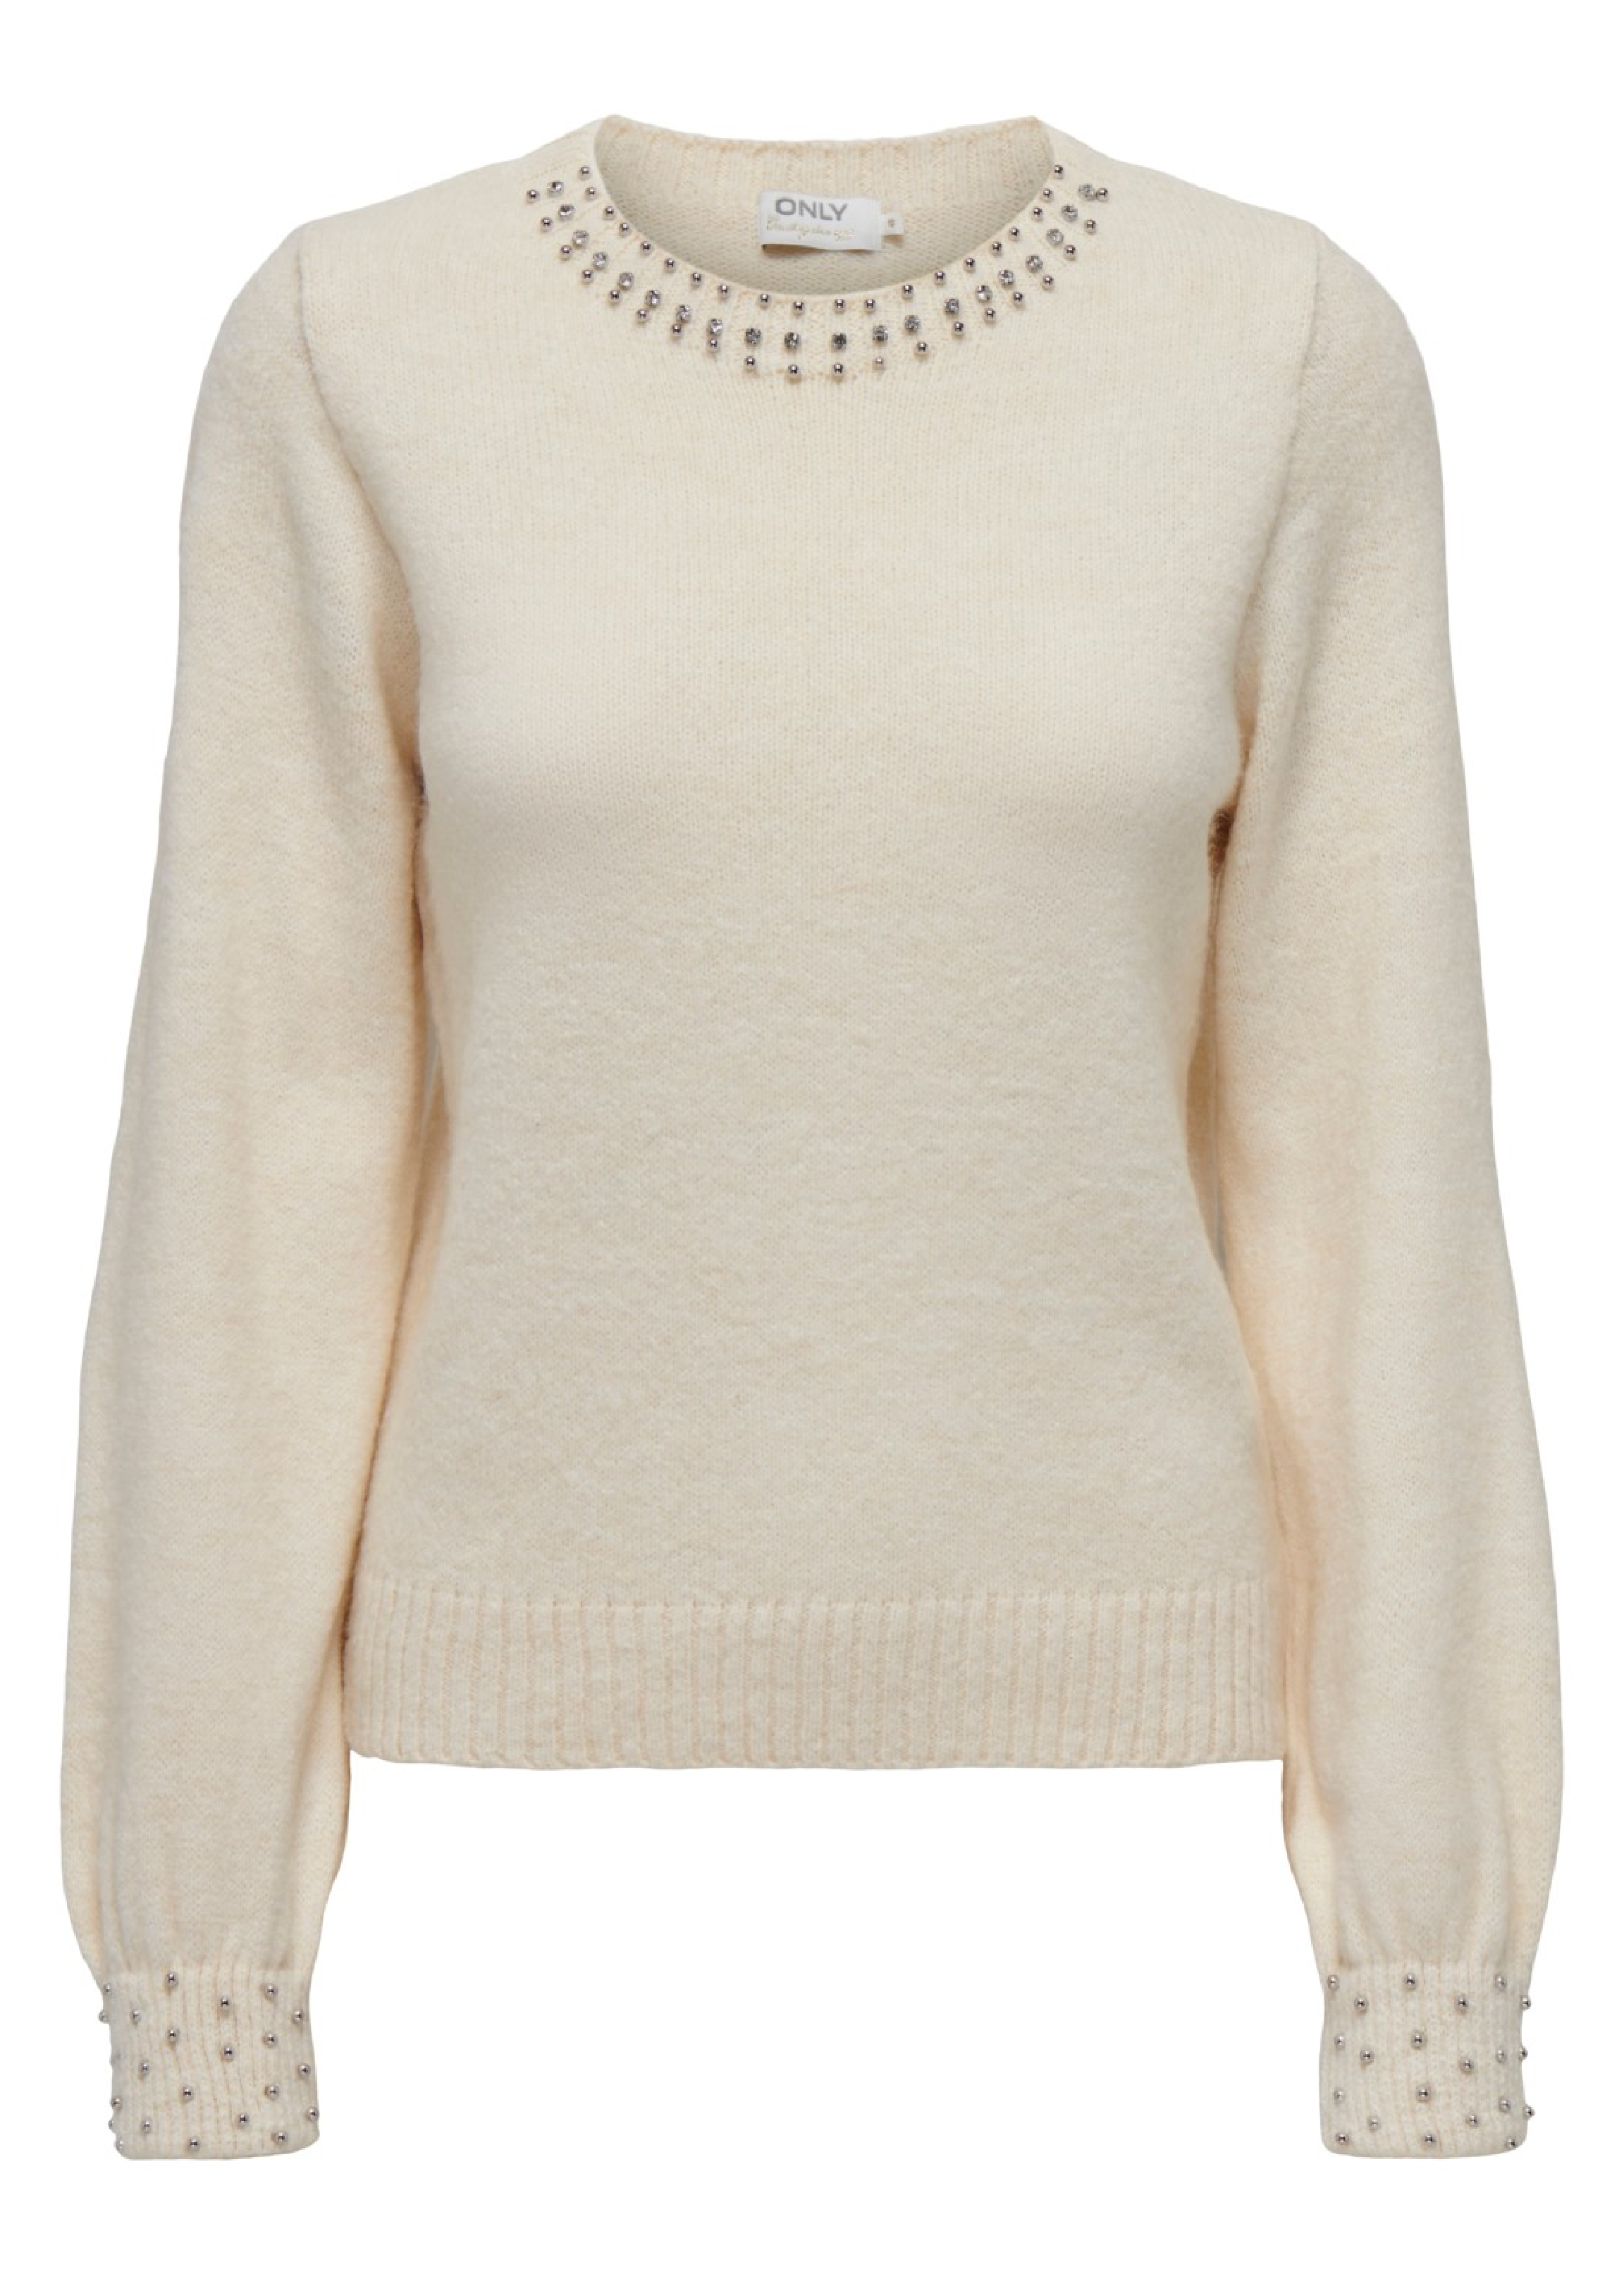 Alessia Pumice Stone Embellished Pullover